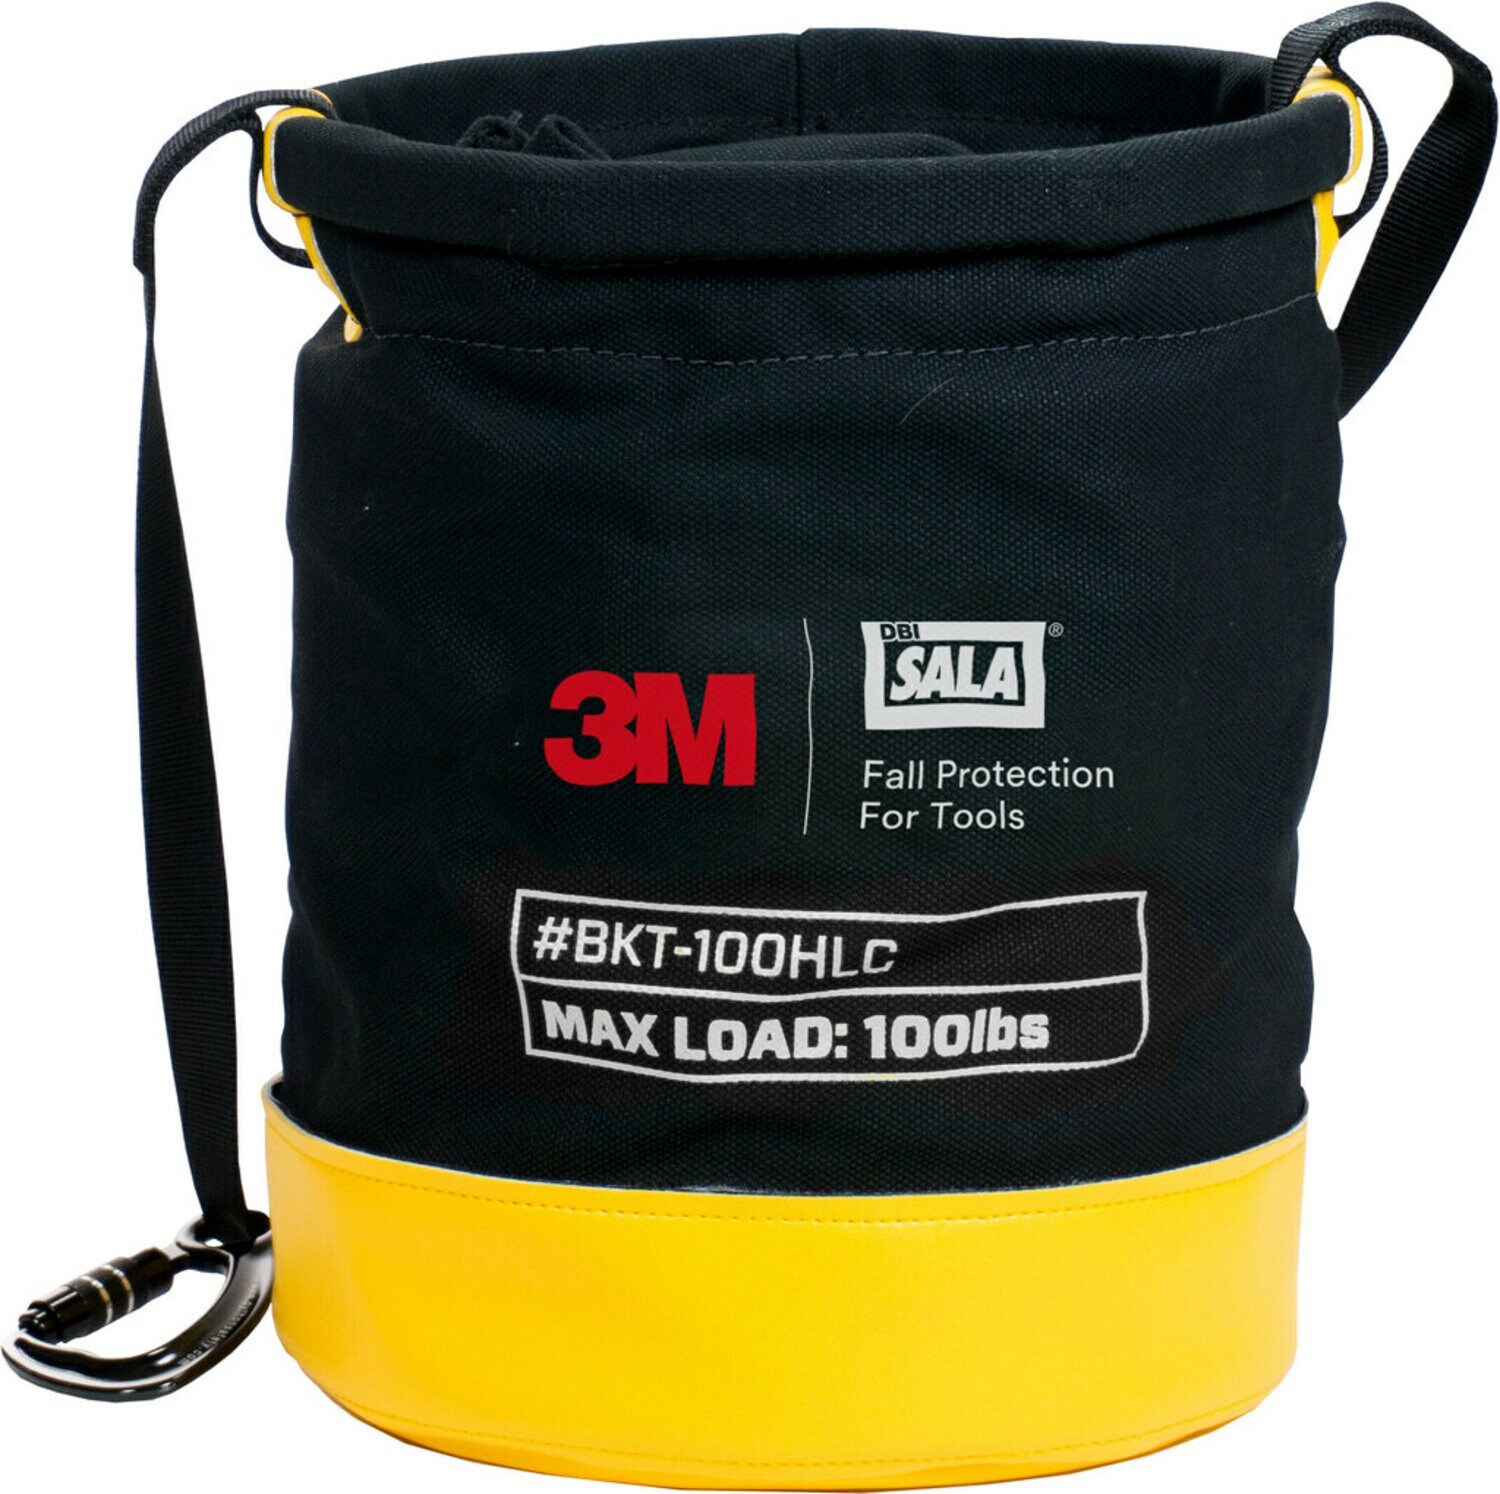 7100270185 - 3M Spill Control Safe Bucket with Drawstring Closure 1500133, 100 lb Capacity, Canvas, 12.5 in dia x 15 in